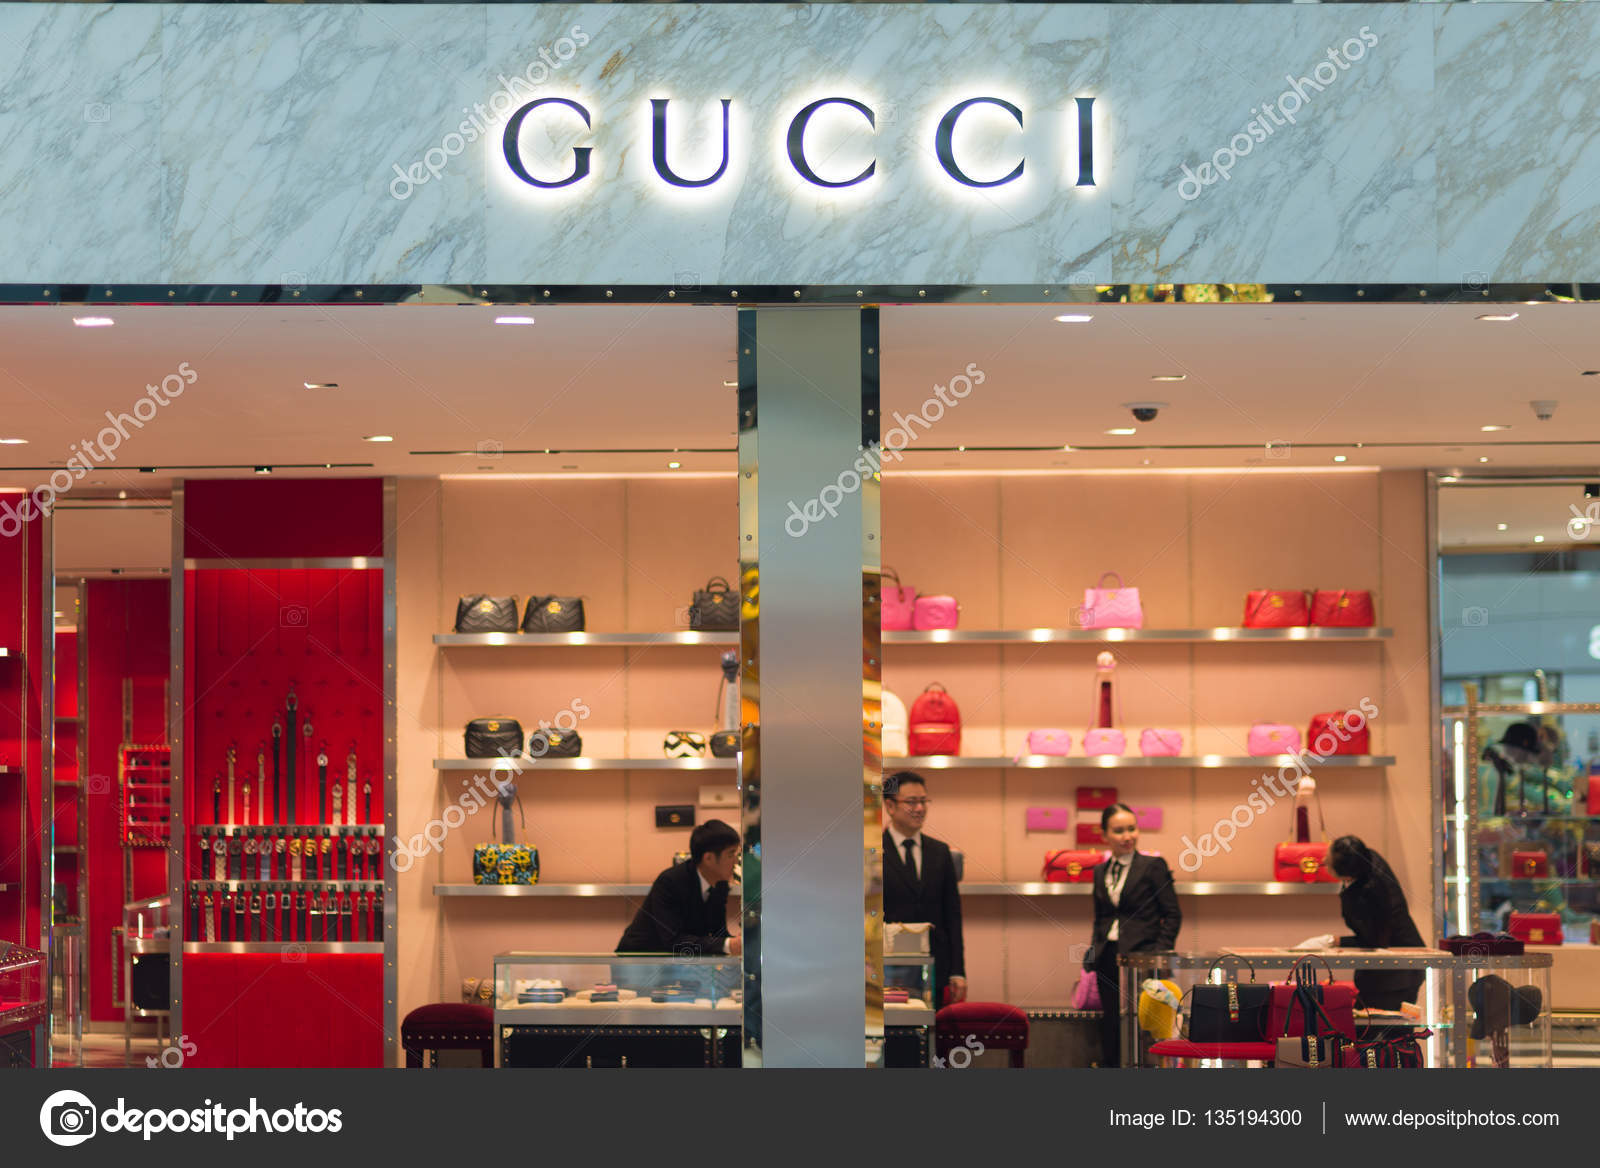 Bangkok, Thailand December 19, 2016: Details of store Suvarnabhumi International Airport, Thailand. Close up. Gucci is an Italian fashion and leather goods brand, founded in 1920 i –